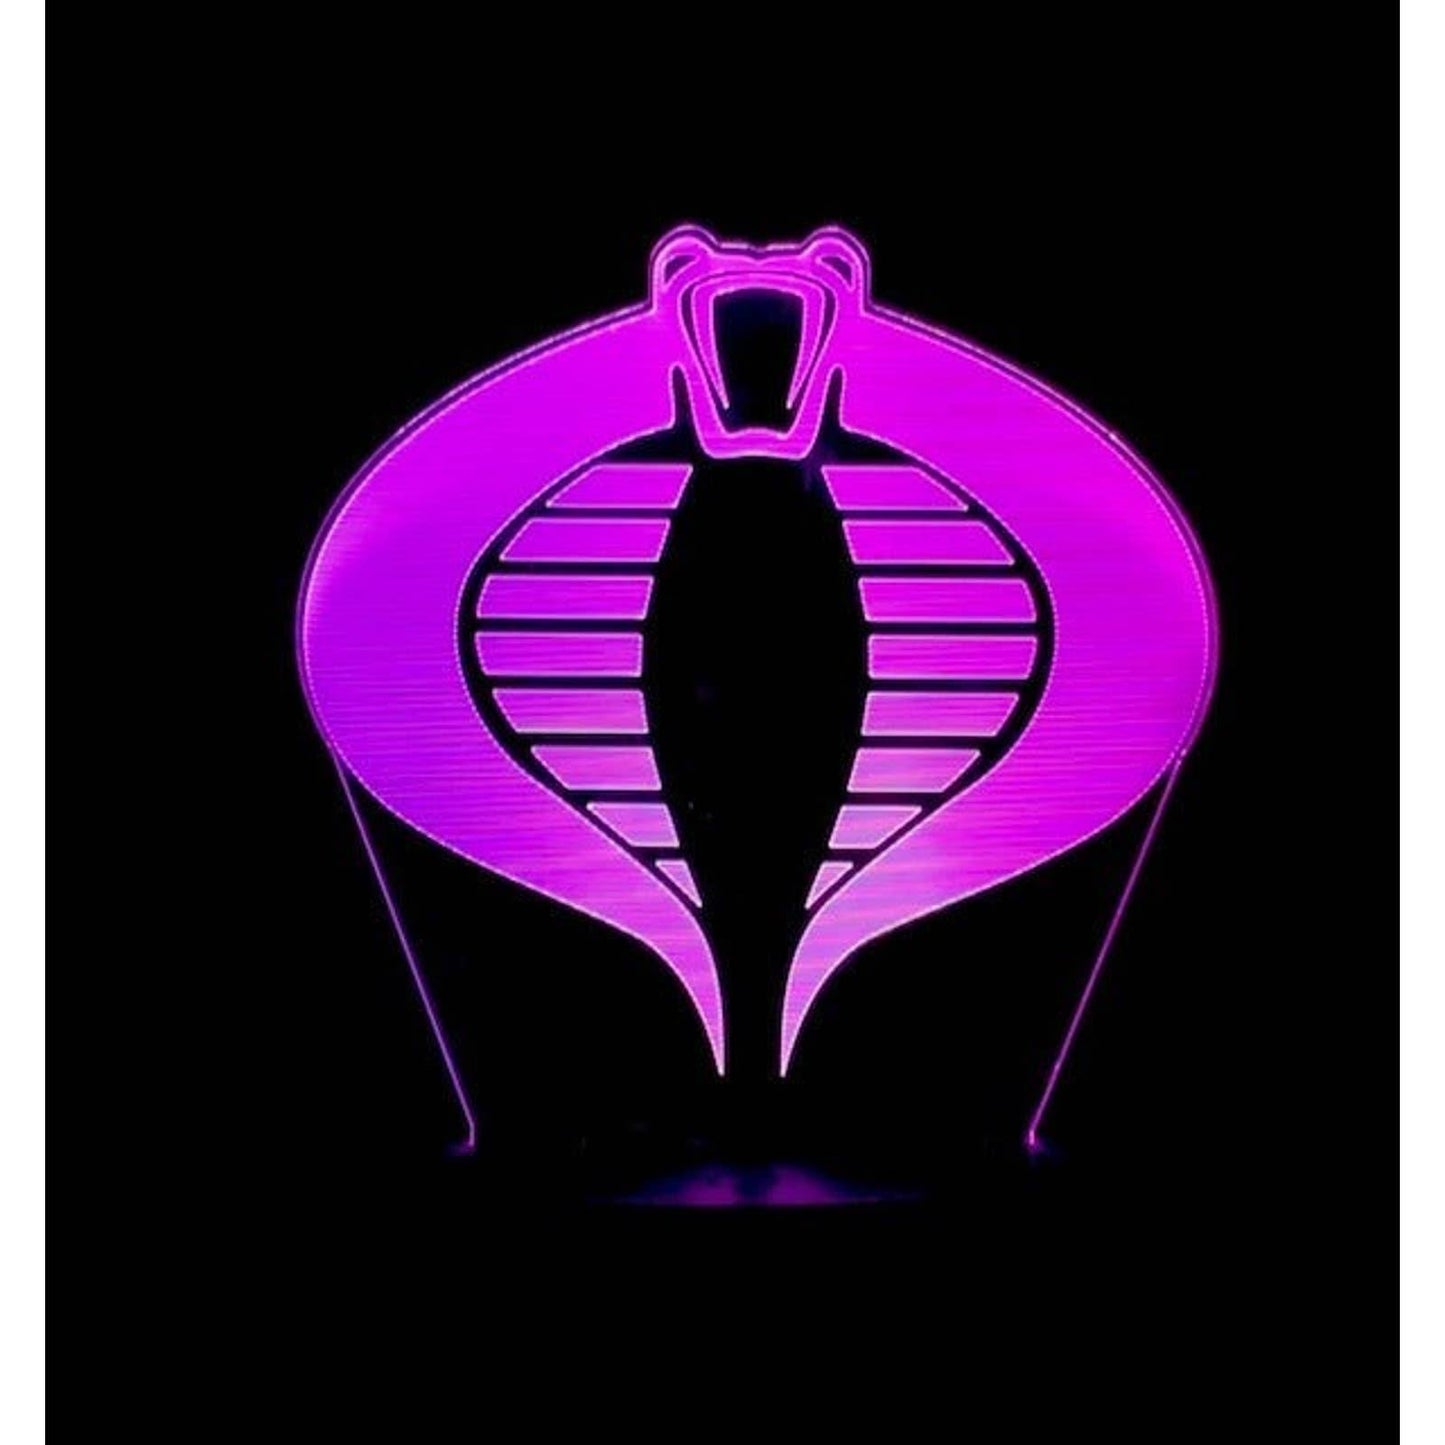 Cobra 3D LED Night-Light 7 Color Changing Lamp w/ Touch Switch